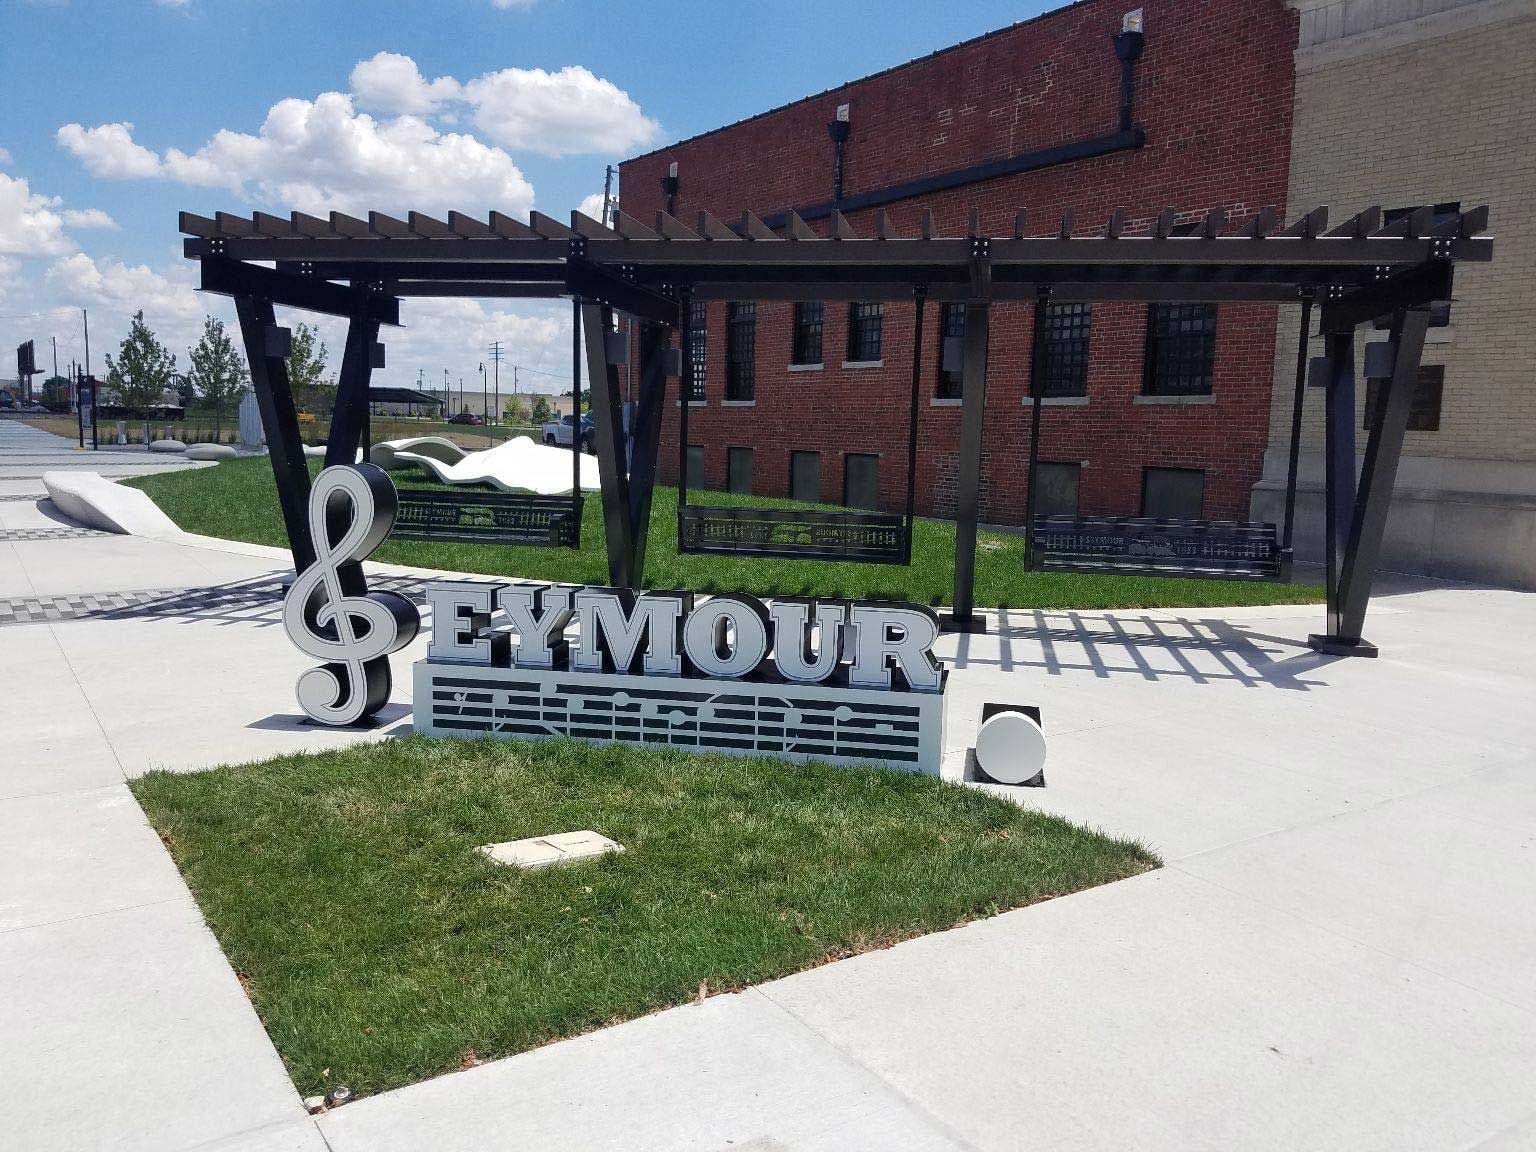 Seymour, Indiana, won’t allow side-by-sides in town.